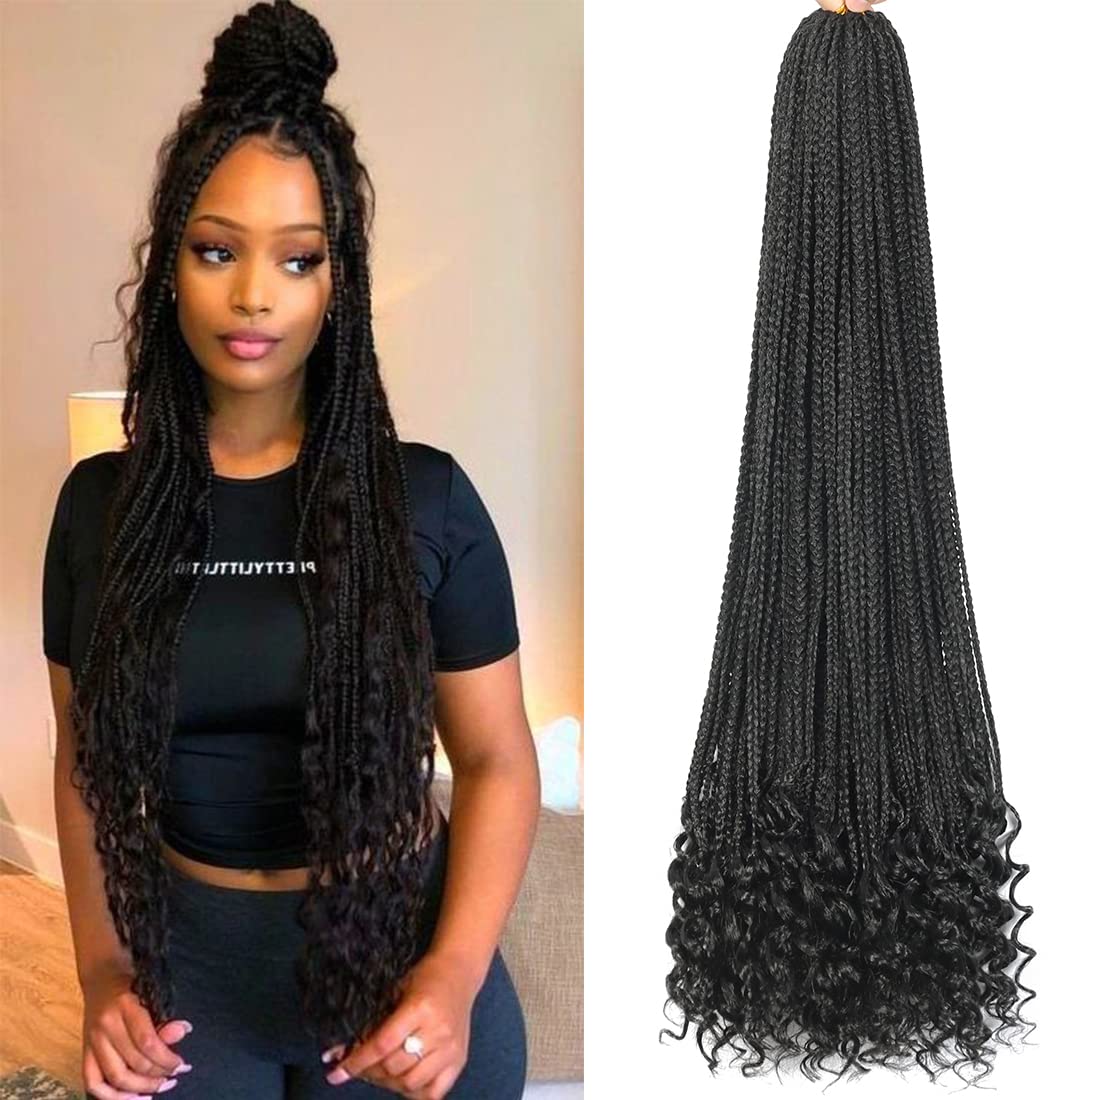 8 Packs 30 Inch Crochet Box Braids Hair with Curly Ends Pre Looped